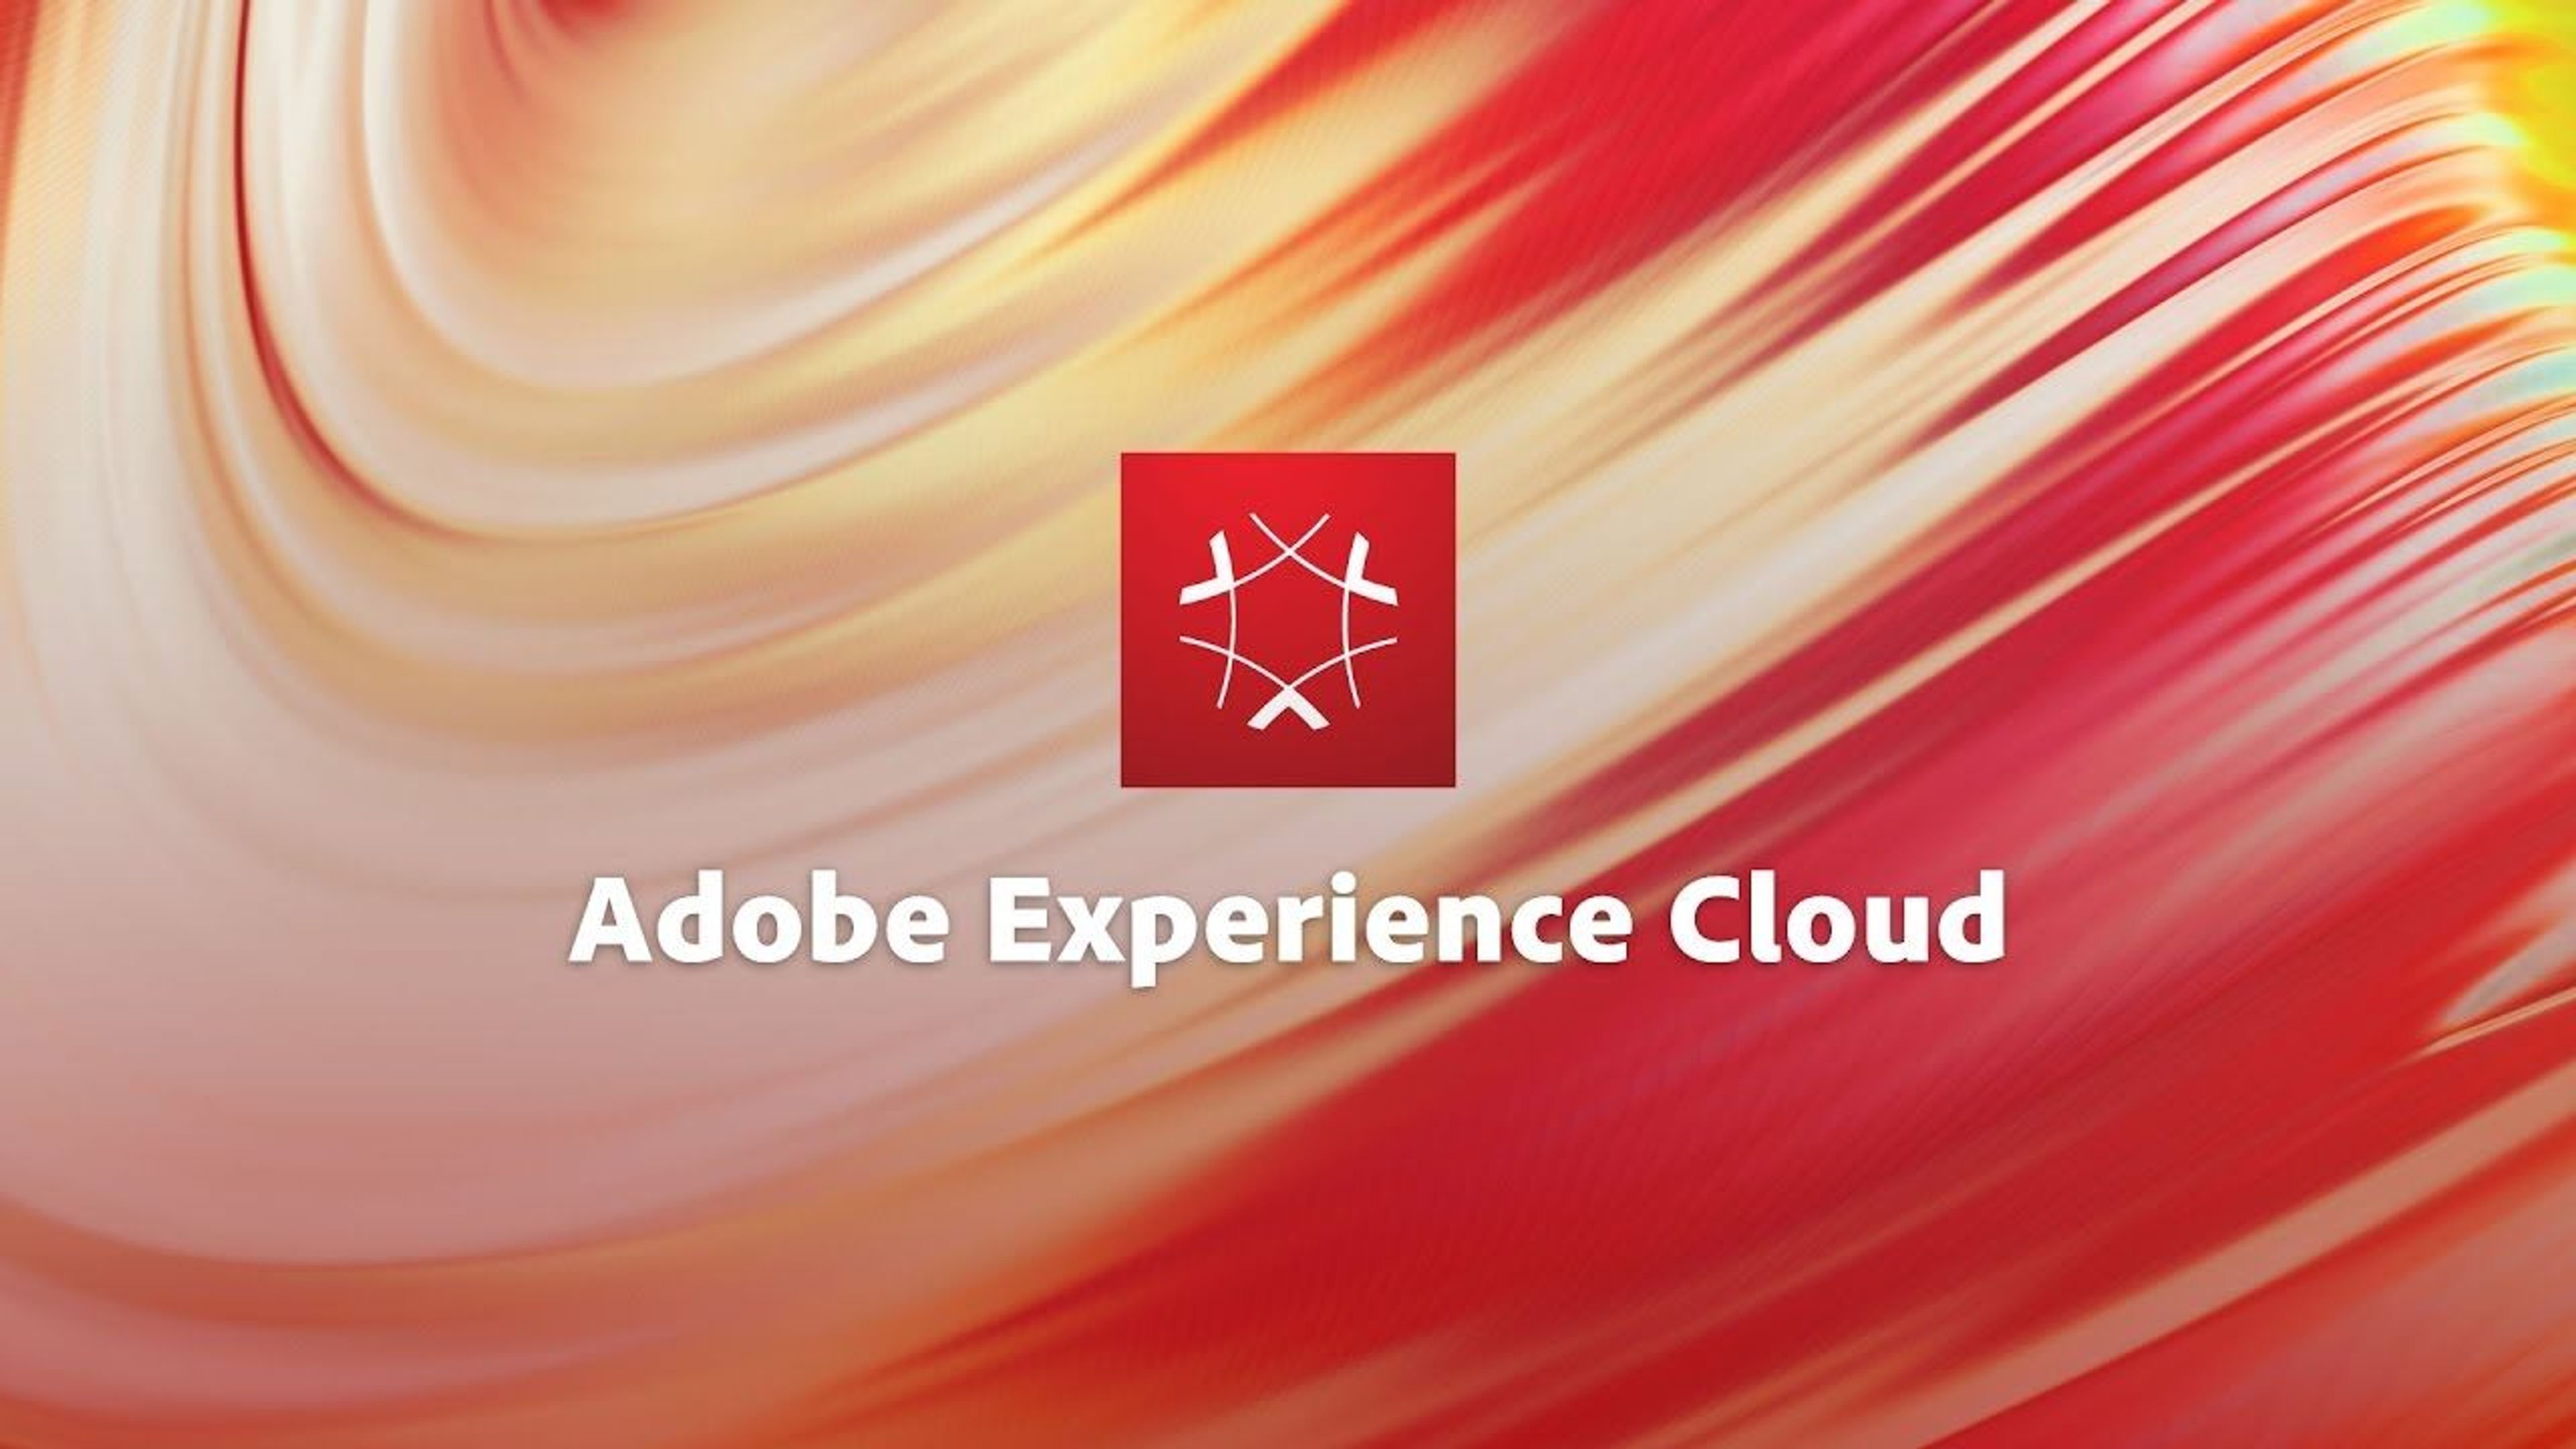 Adobe Experience Cloud text and logo